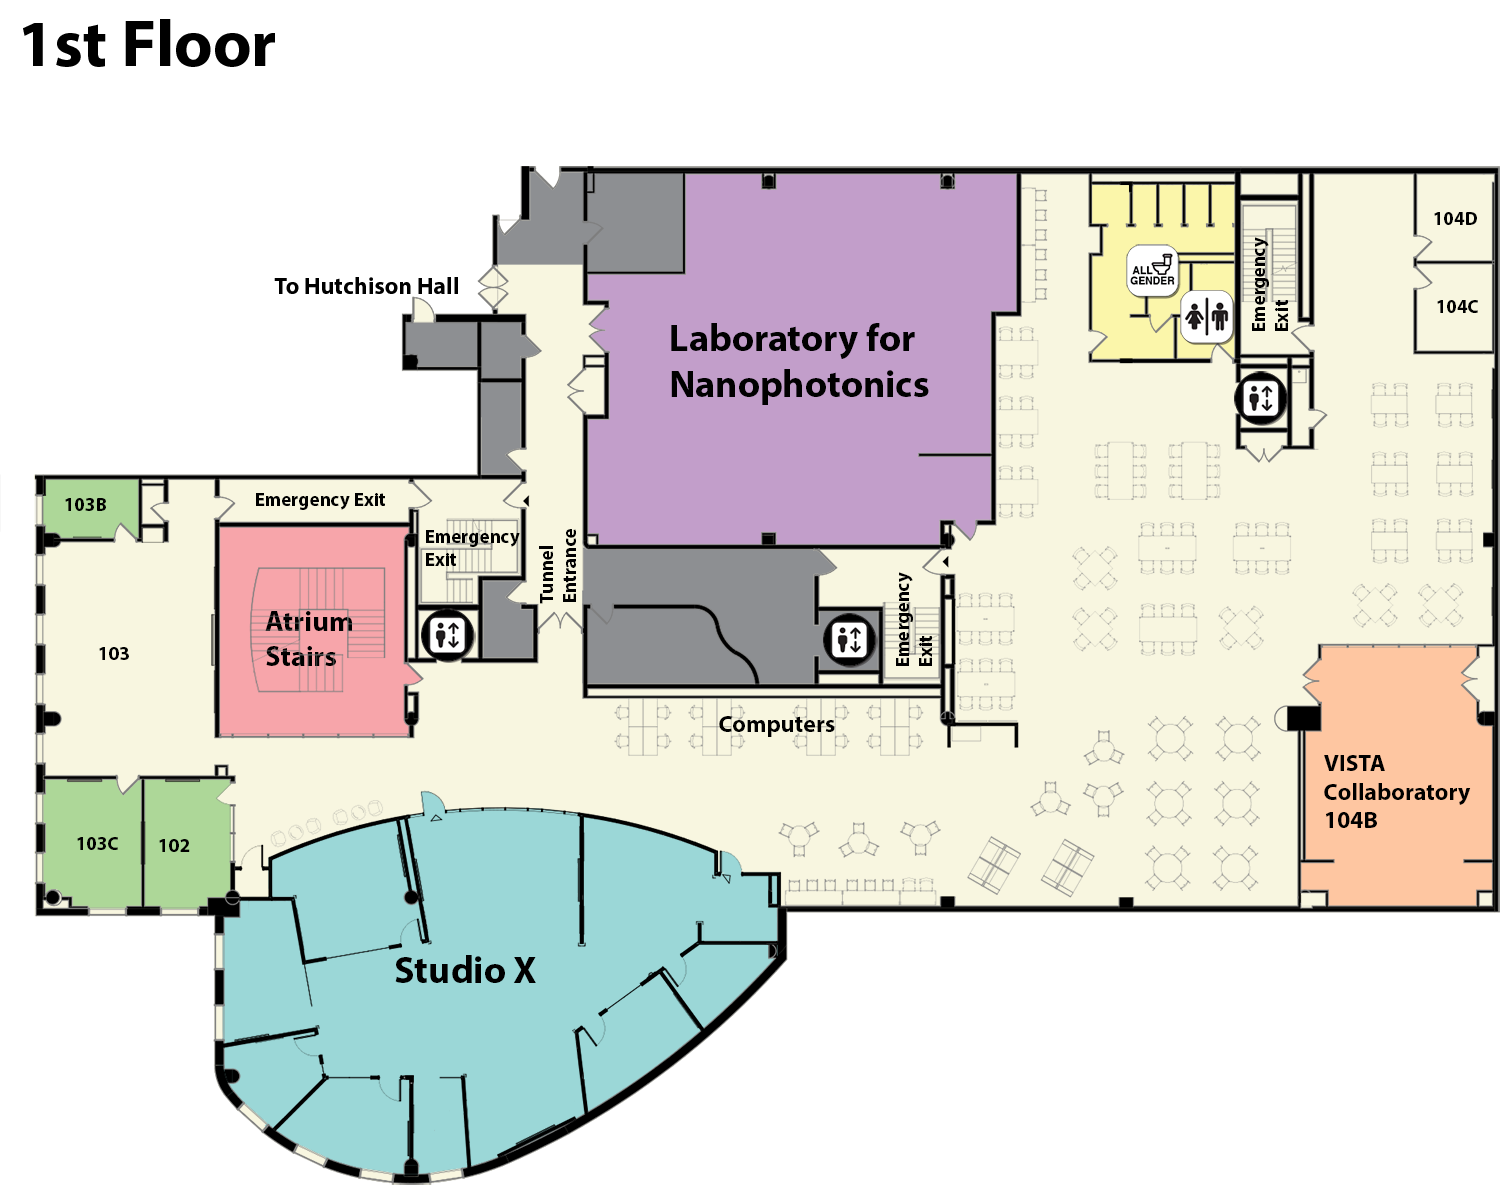 Carlson Library first floor layout including the new StudioX